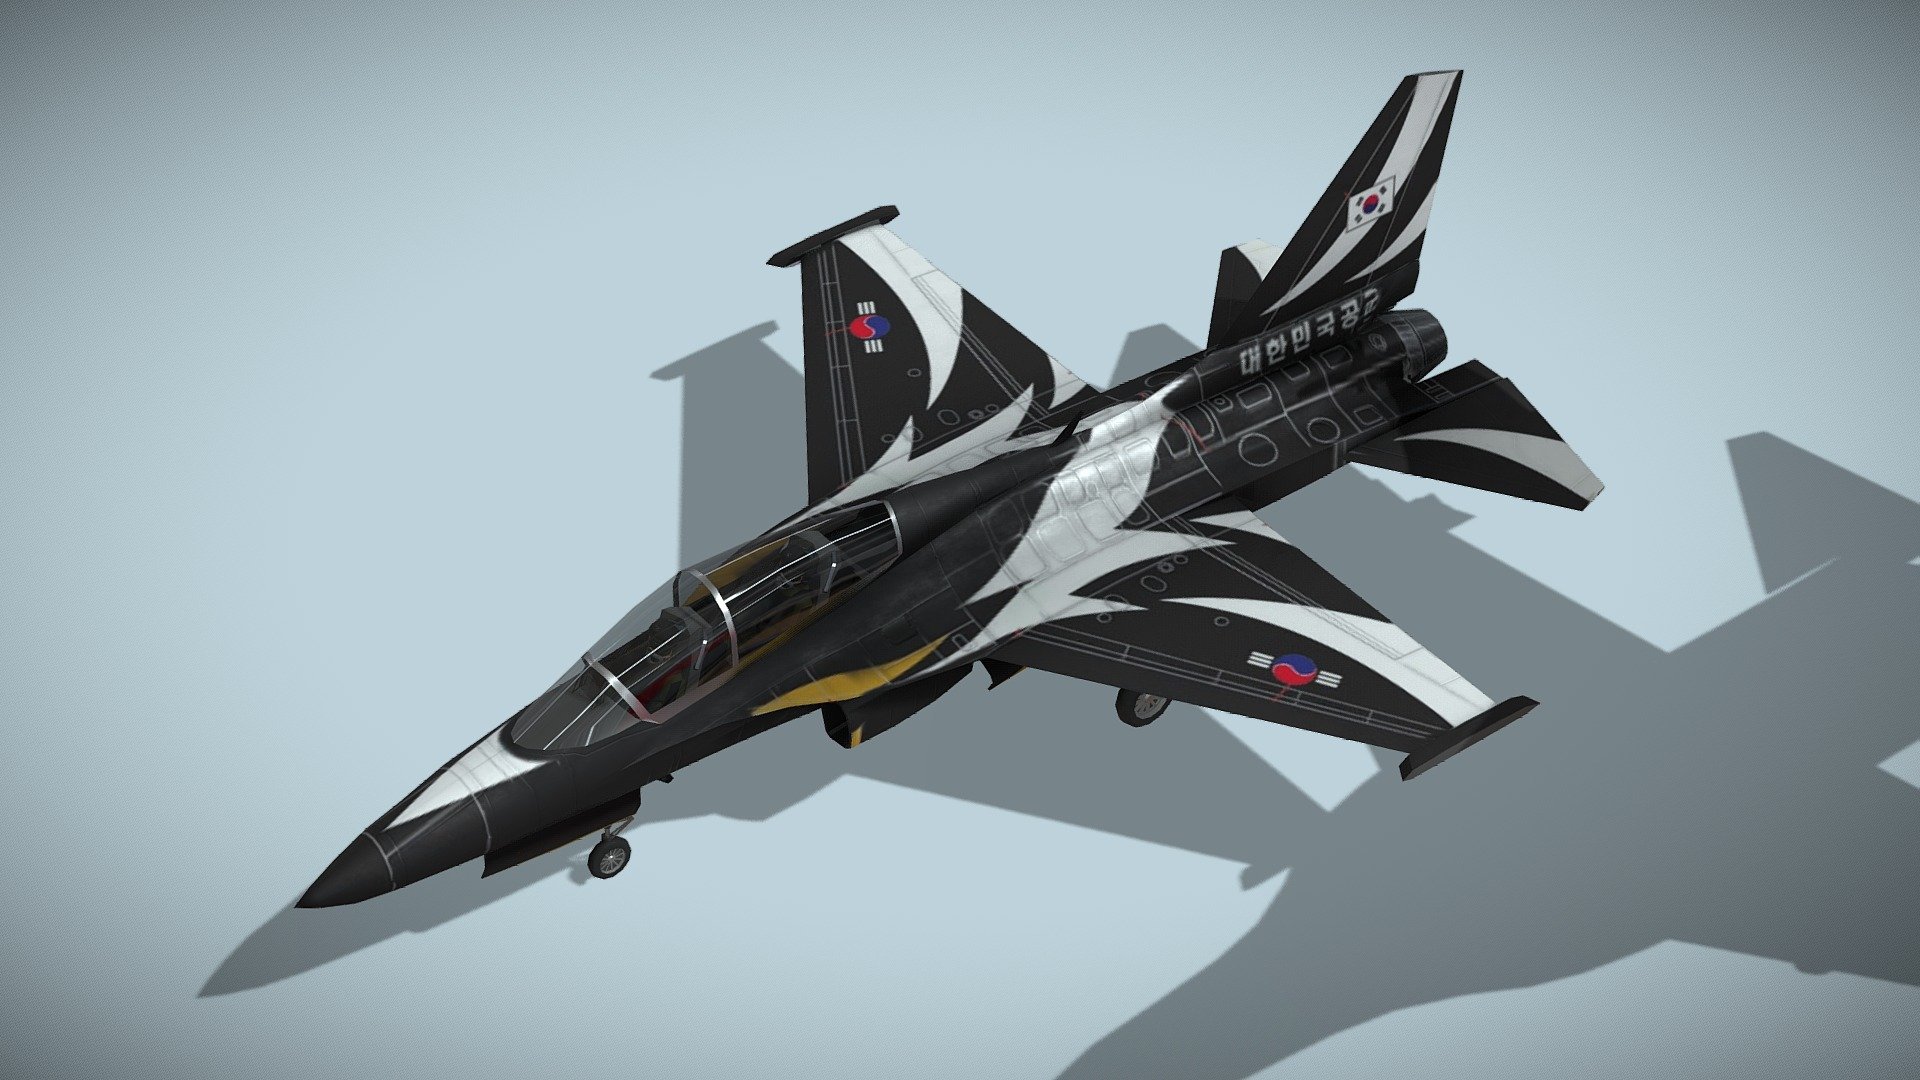 KAI FA-50 Golden Eagle

Lowpoly model of korean light fighter



KAI T-50 Golden Eagle is a family of South Korean supersonic advanced jet trainers and light combat aircraft, developed by Korea Aerospace Industries (KAI) with Lockheed Martin. The T-50 is South Korea's first indigenous supersonic aircraft and one of the world's few supersonic trainers. Development began in the late 90s, and its maiden flight occurred in 2002. The aircraft entered active service in 2005.


The T-50 has been further developed into aerobatic and combat variants, namely T-50B, TA-50, and FA-50. A F-50 single-seat multirole fighter variant was considered before being cancelled. The T-50B serves with the South Korean air force's aerobatics team.



Fully rigged

Model has roughness map and 2 x diffuse textures

Including 3D print STL file



Check also my aircrafts and cars

Patreon with monthly free model - KAI FA-50 Golden Eagle - Buy Royalty Free 3D model by NETRUNNER_pl 3d model